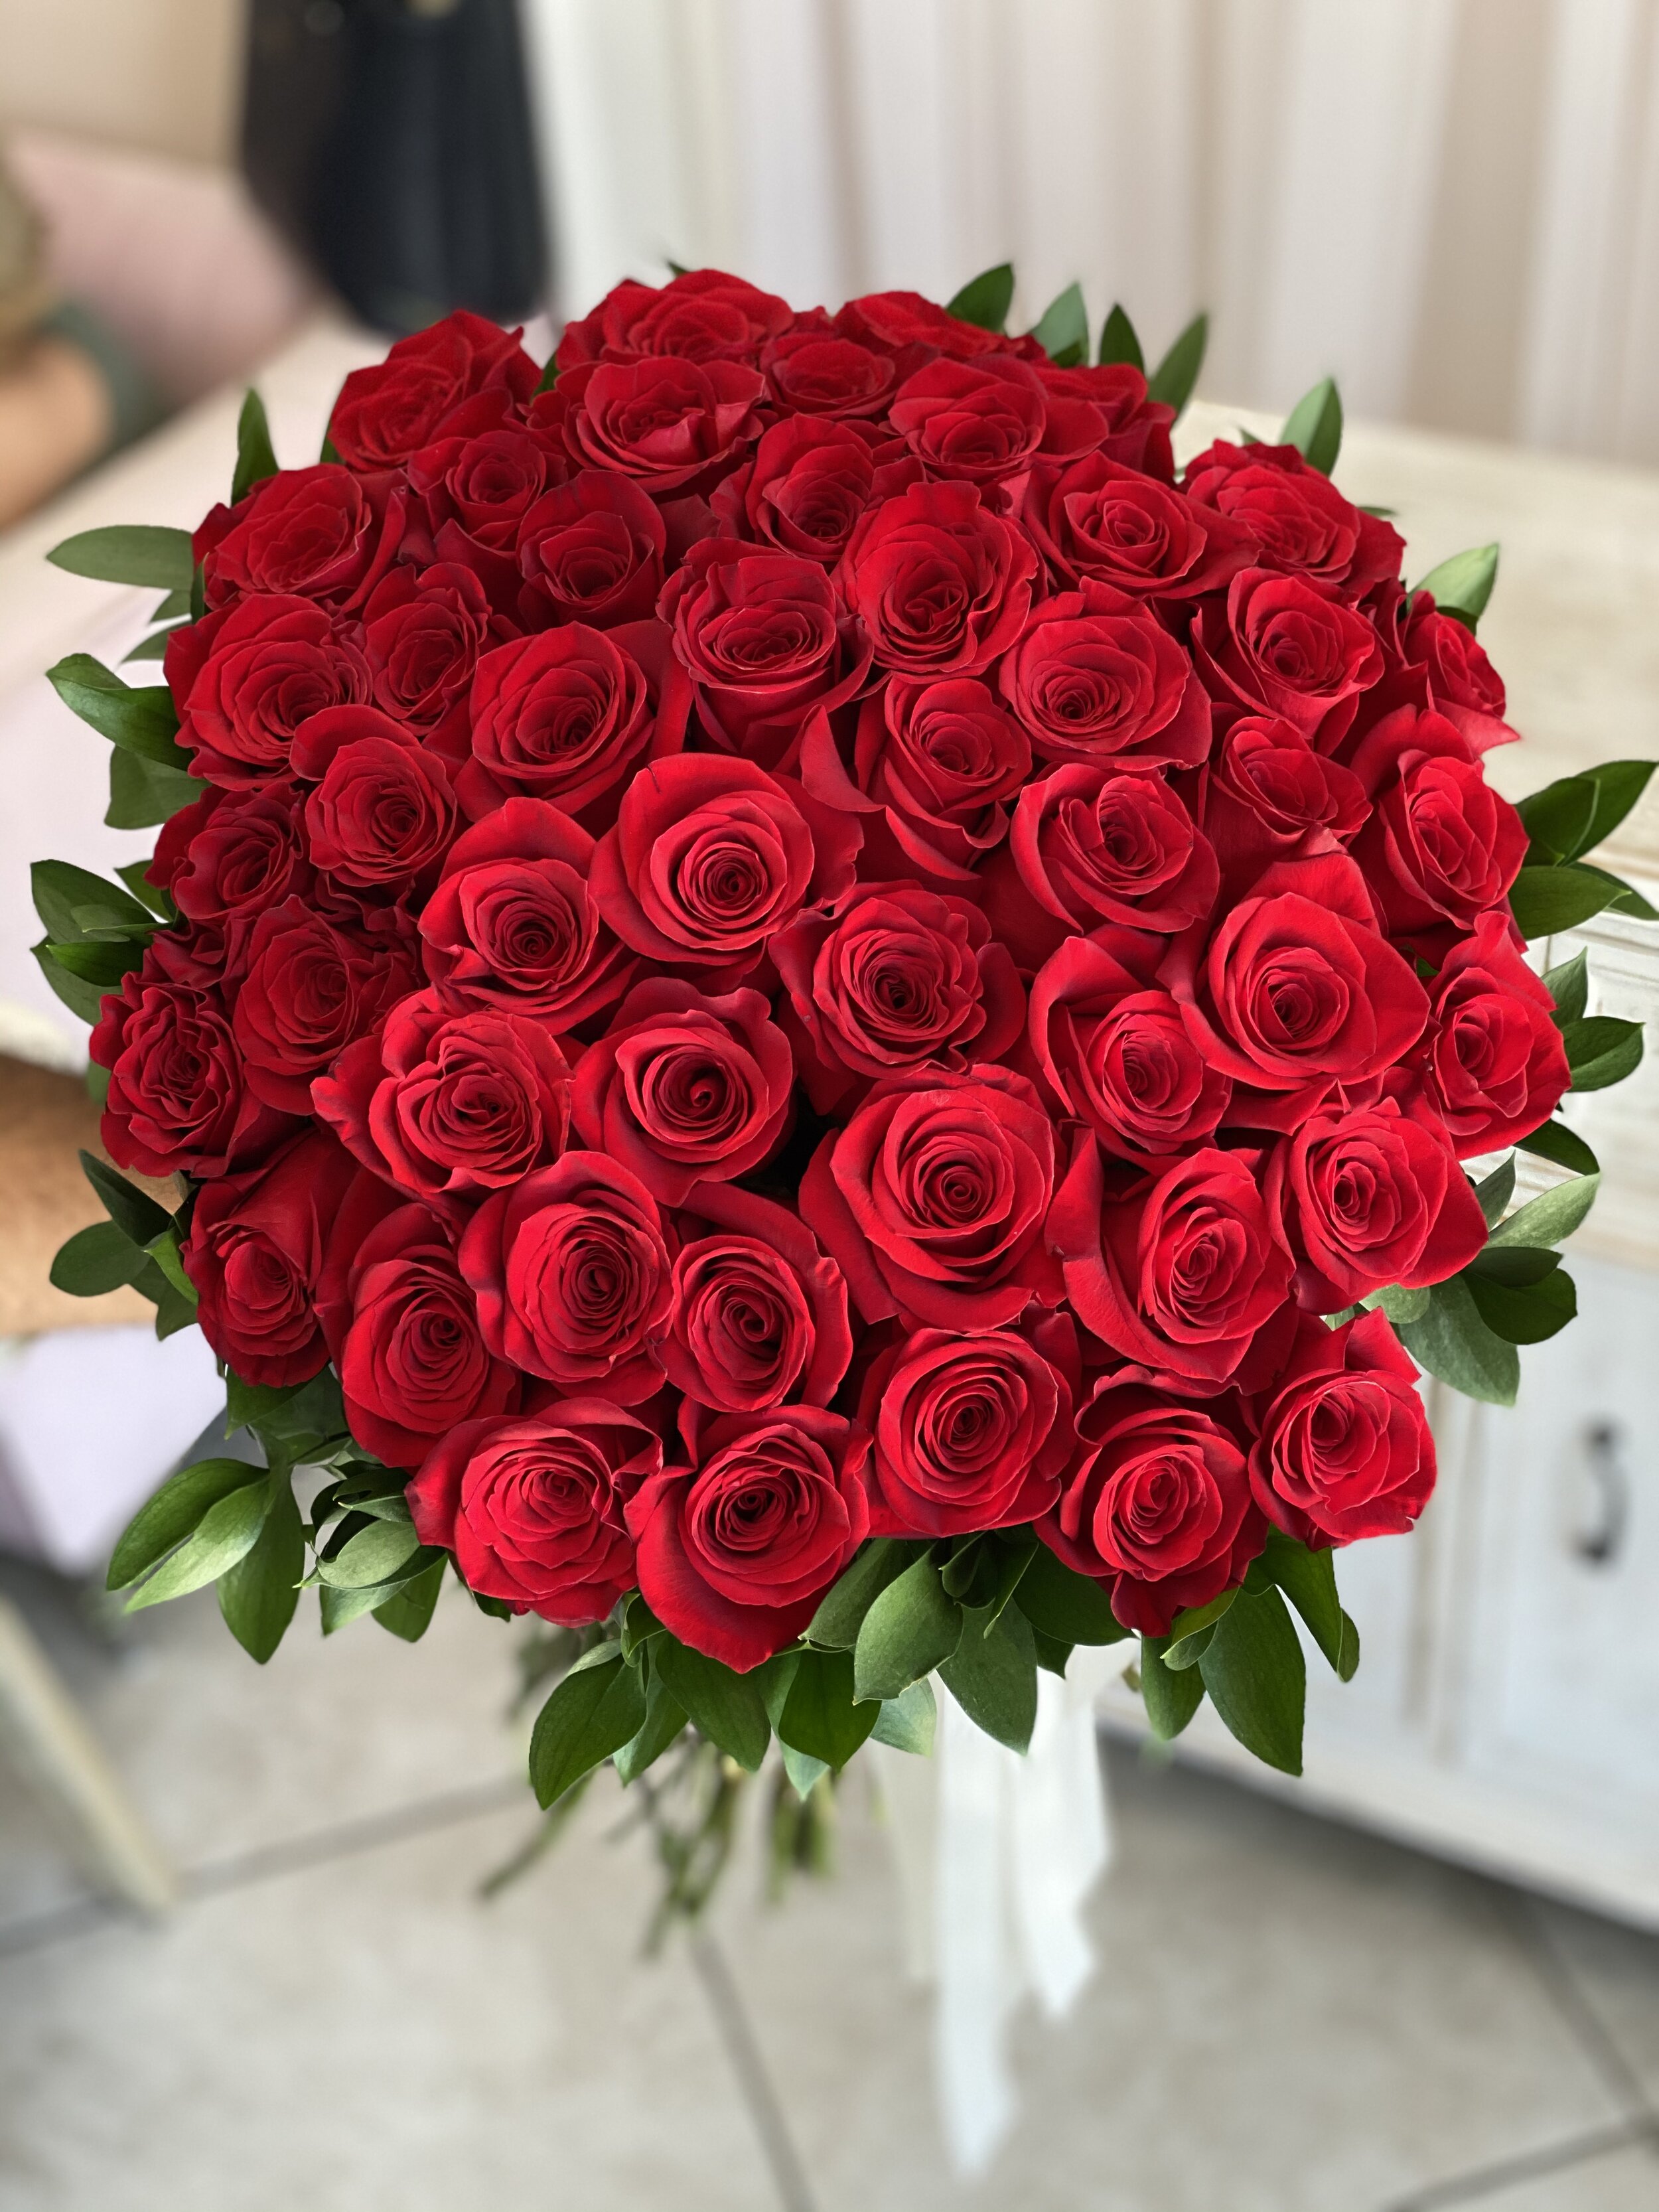 50 Red Rose Hand Bouquet | Fresh Cut Red Roses — Coral Path Designs